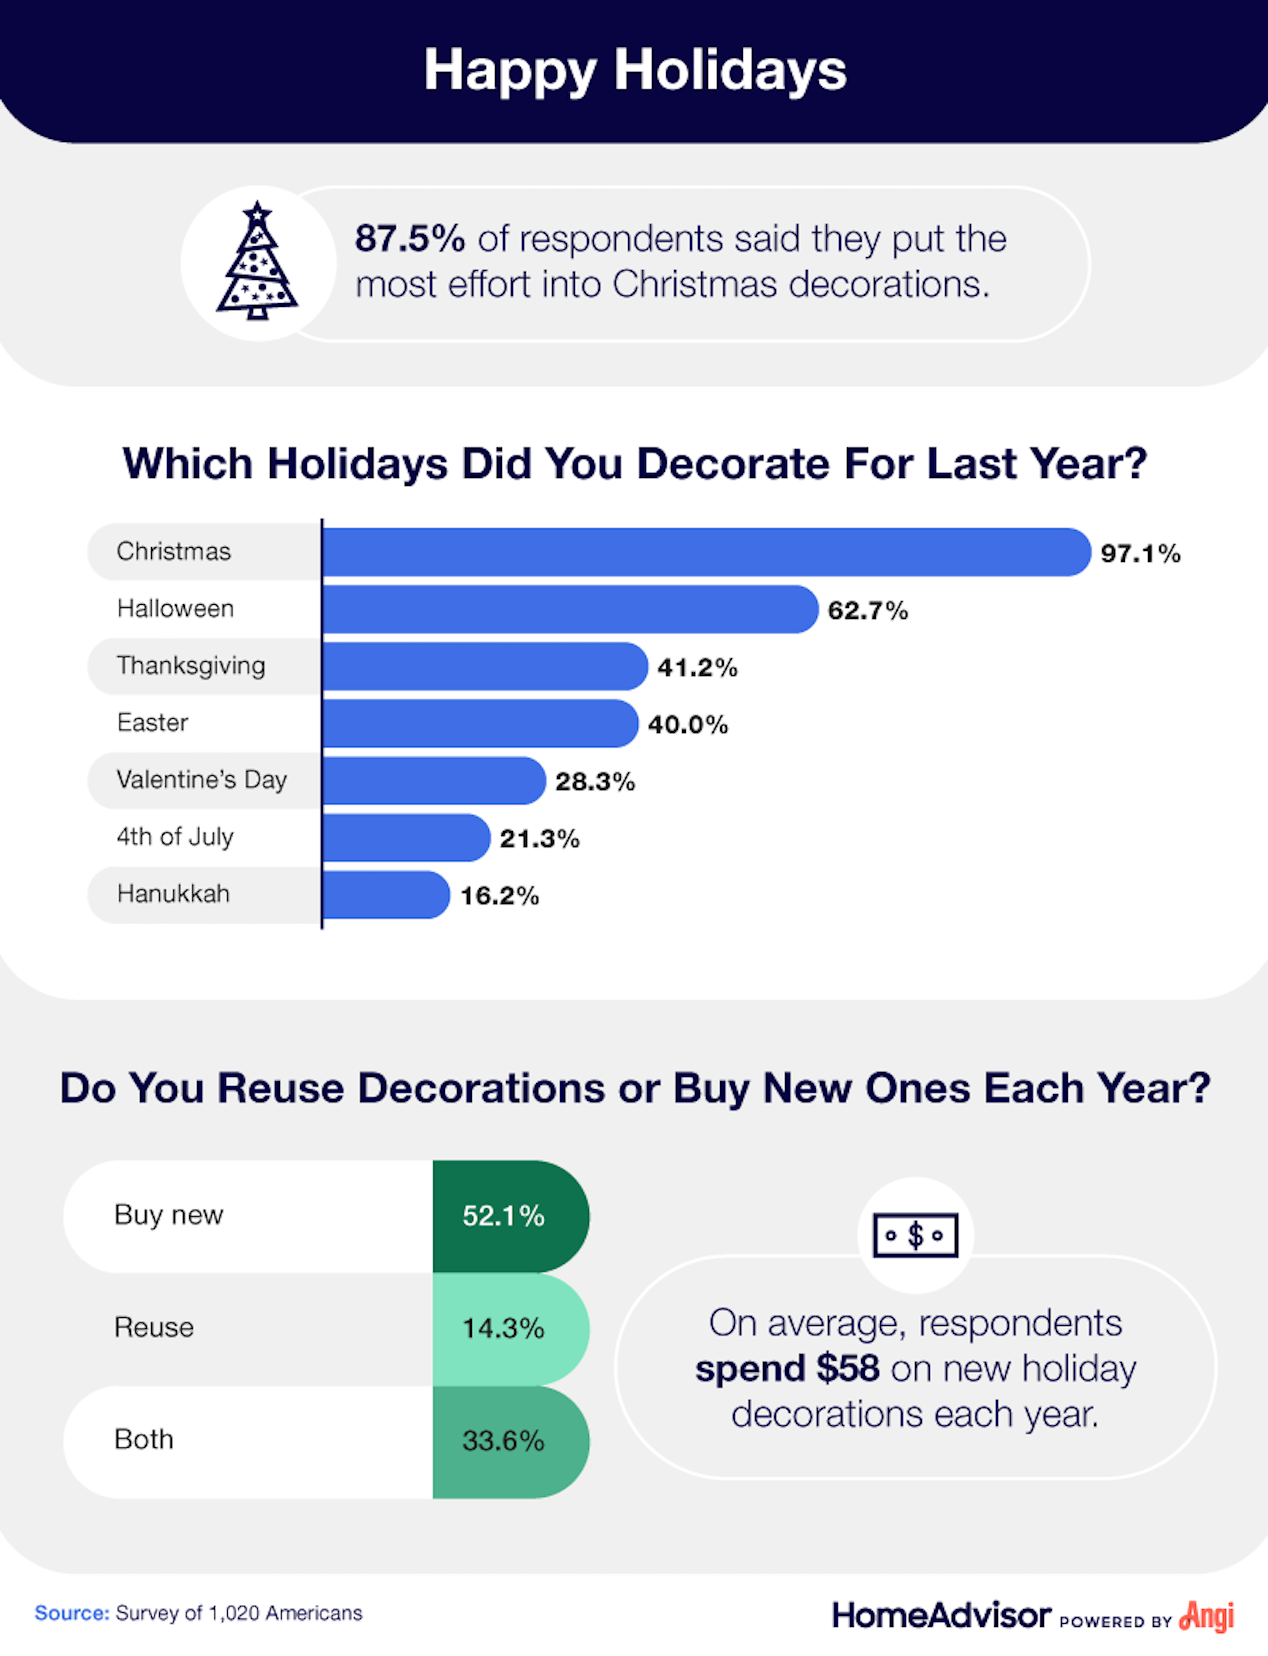 An infographic describing who decorated for Christmas and if they reused decorations